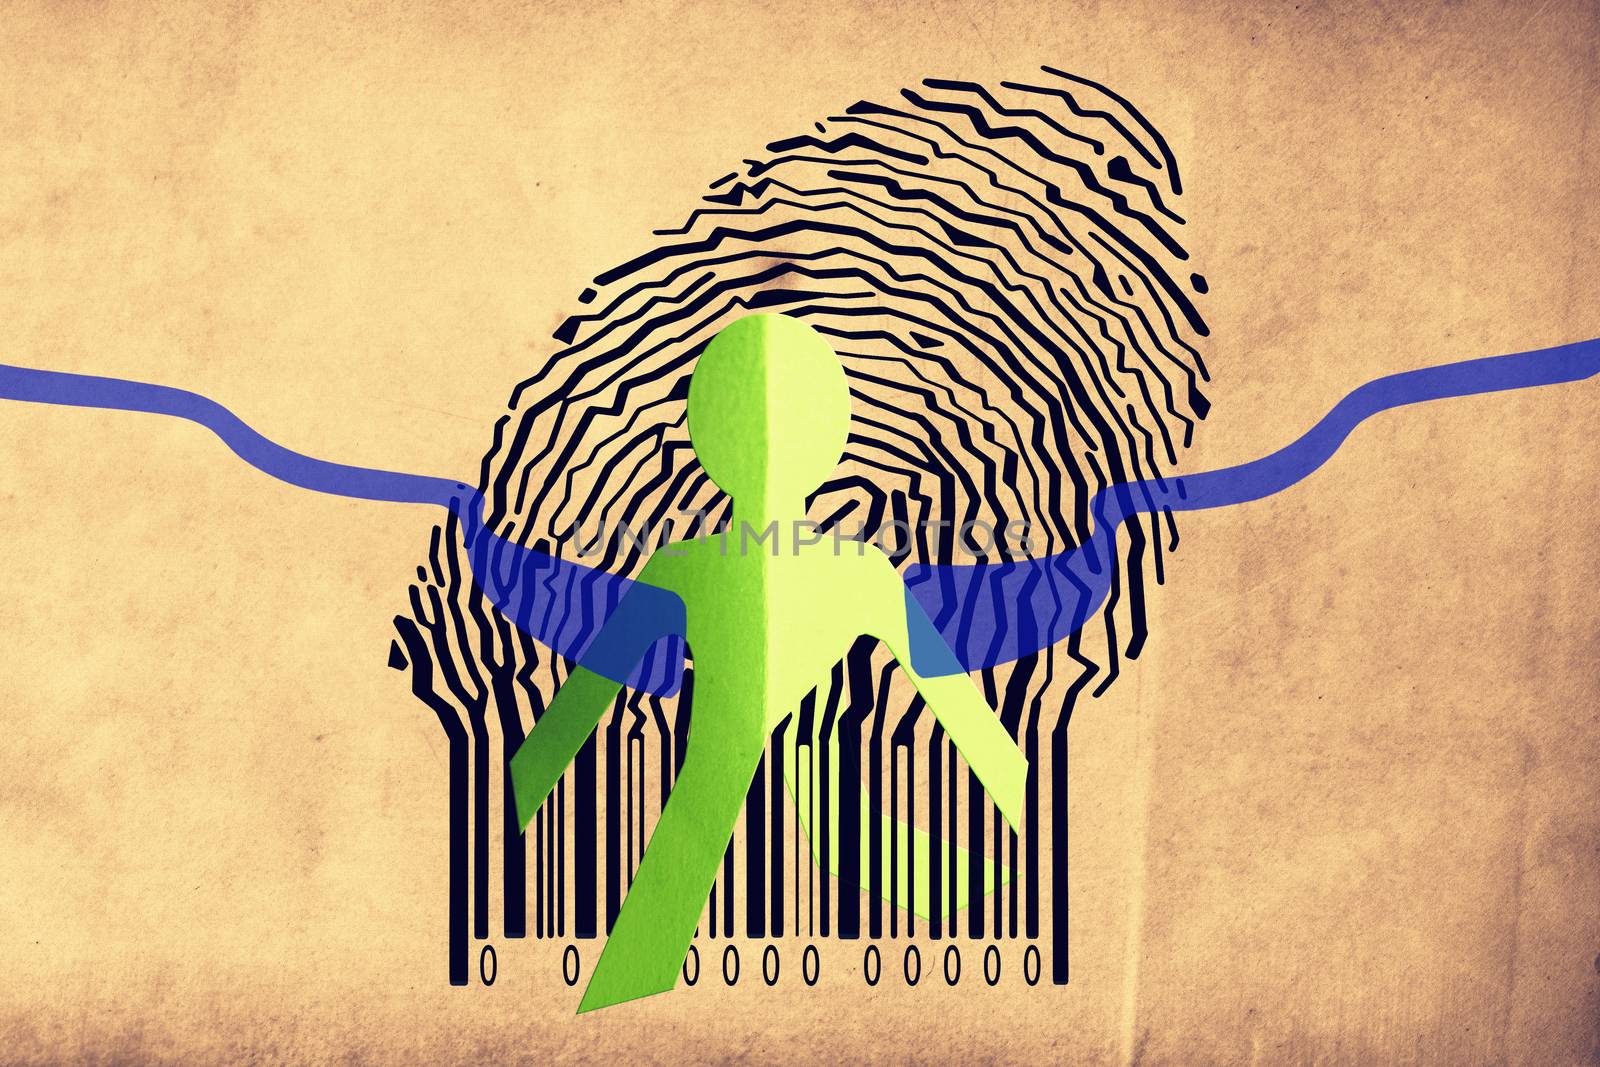 Paperman coming out of a bar code with Finish Line